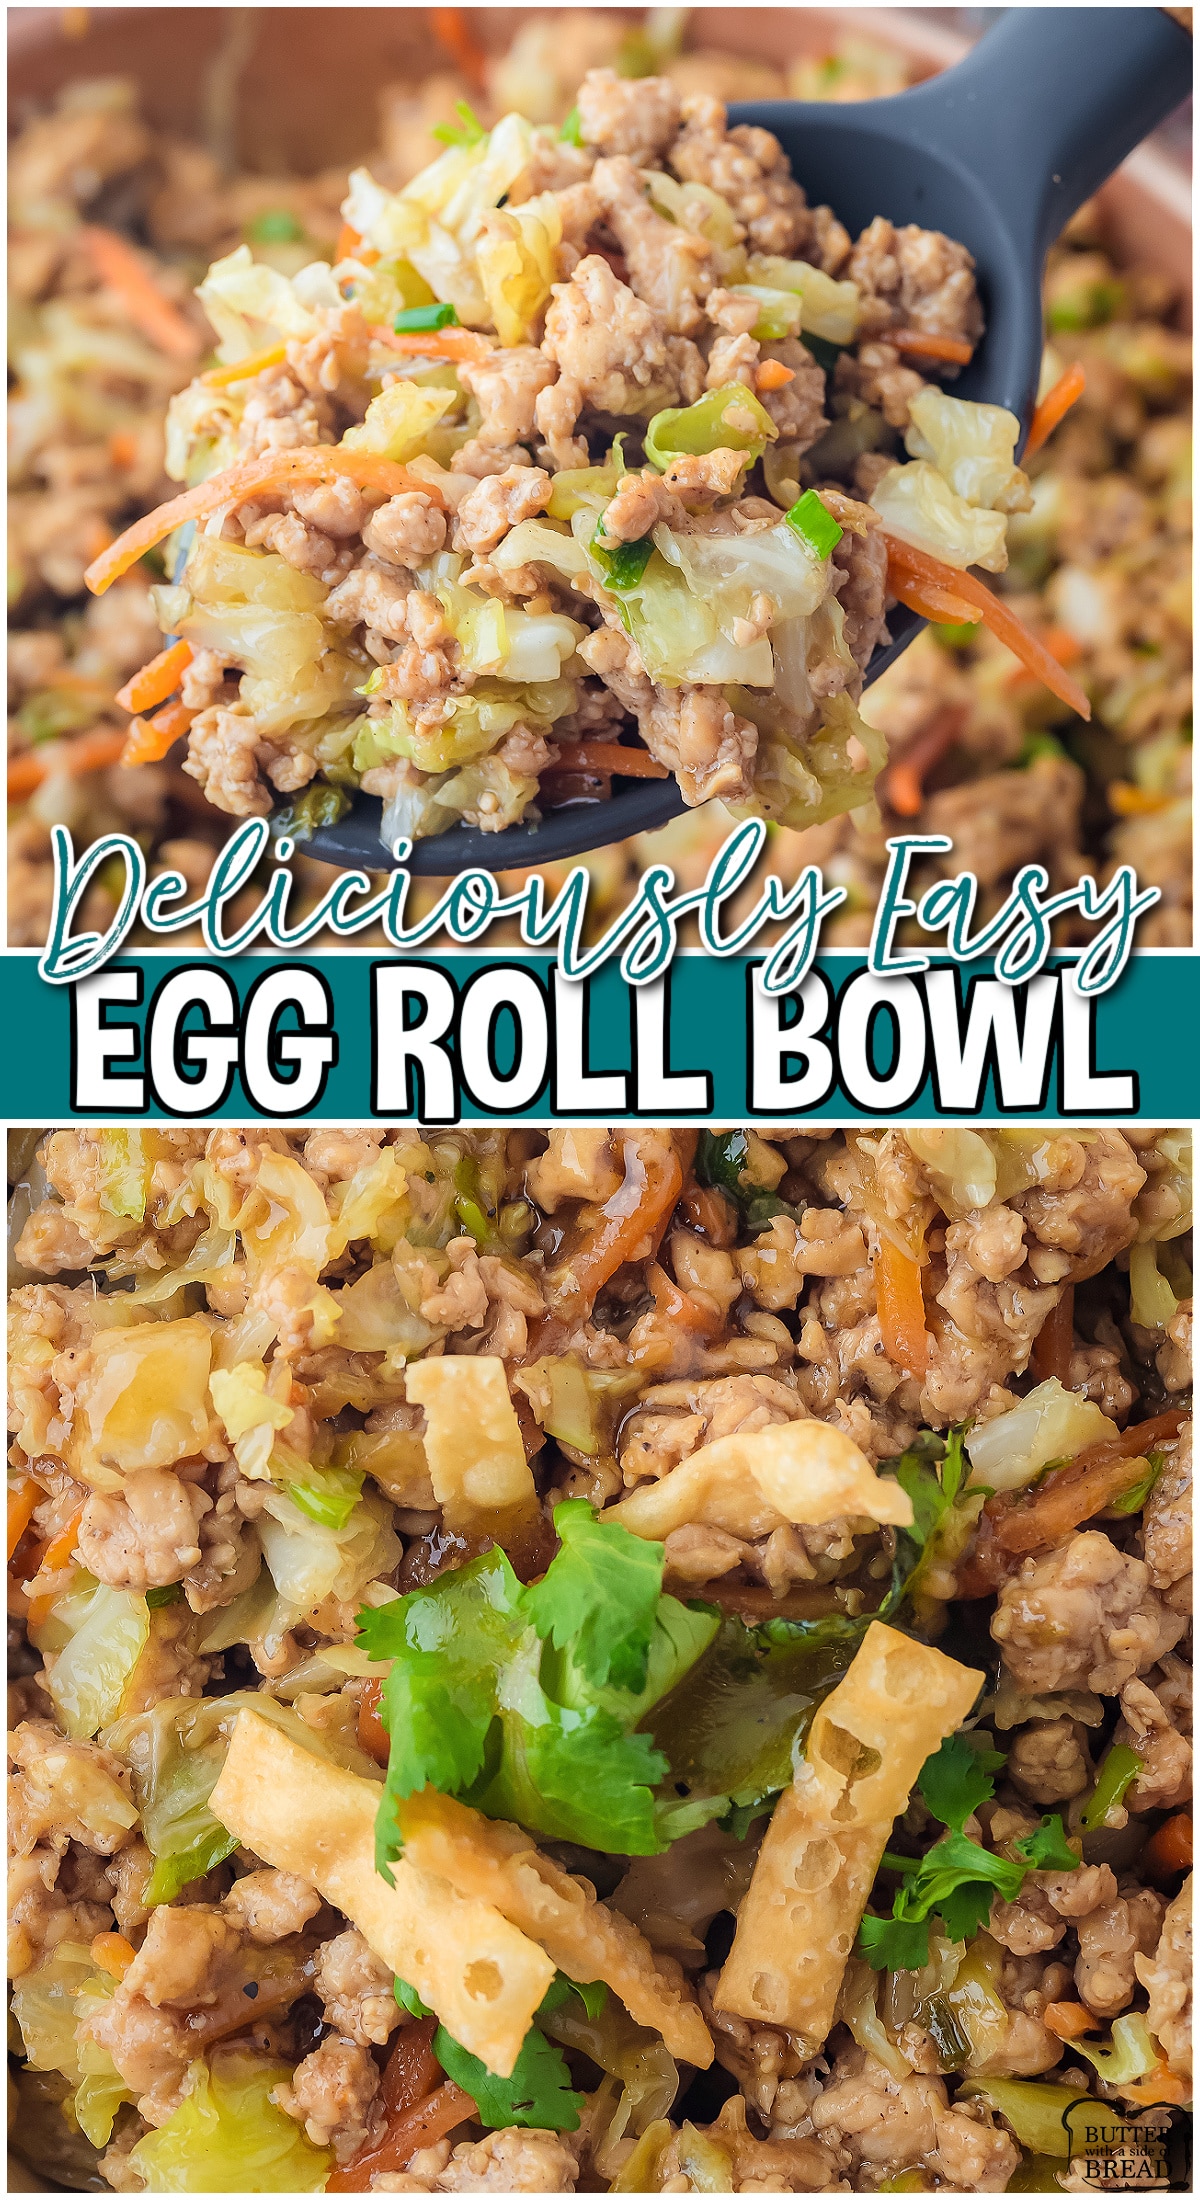 Inside Out Egg Rolls are a delicious twist on the classic Chinese appetizer! This egg roll in a bowl recipe is a one-pot combination of meat, vegetables and spices, and can be served as an appetizer or a main dish!